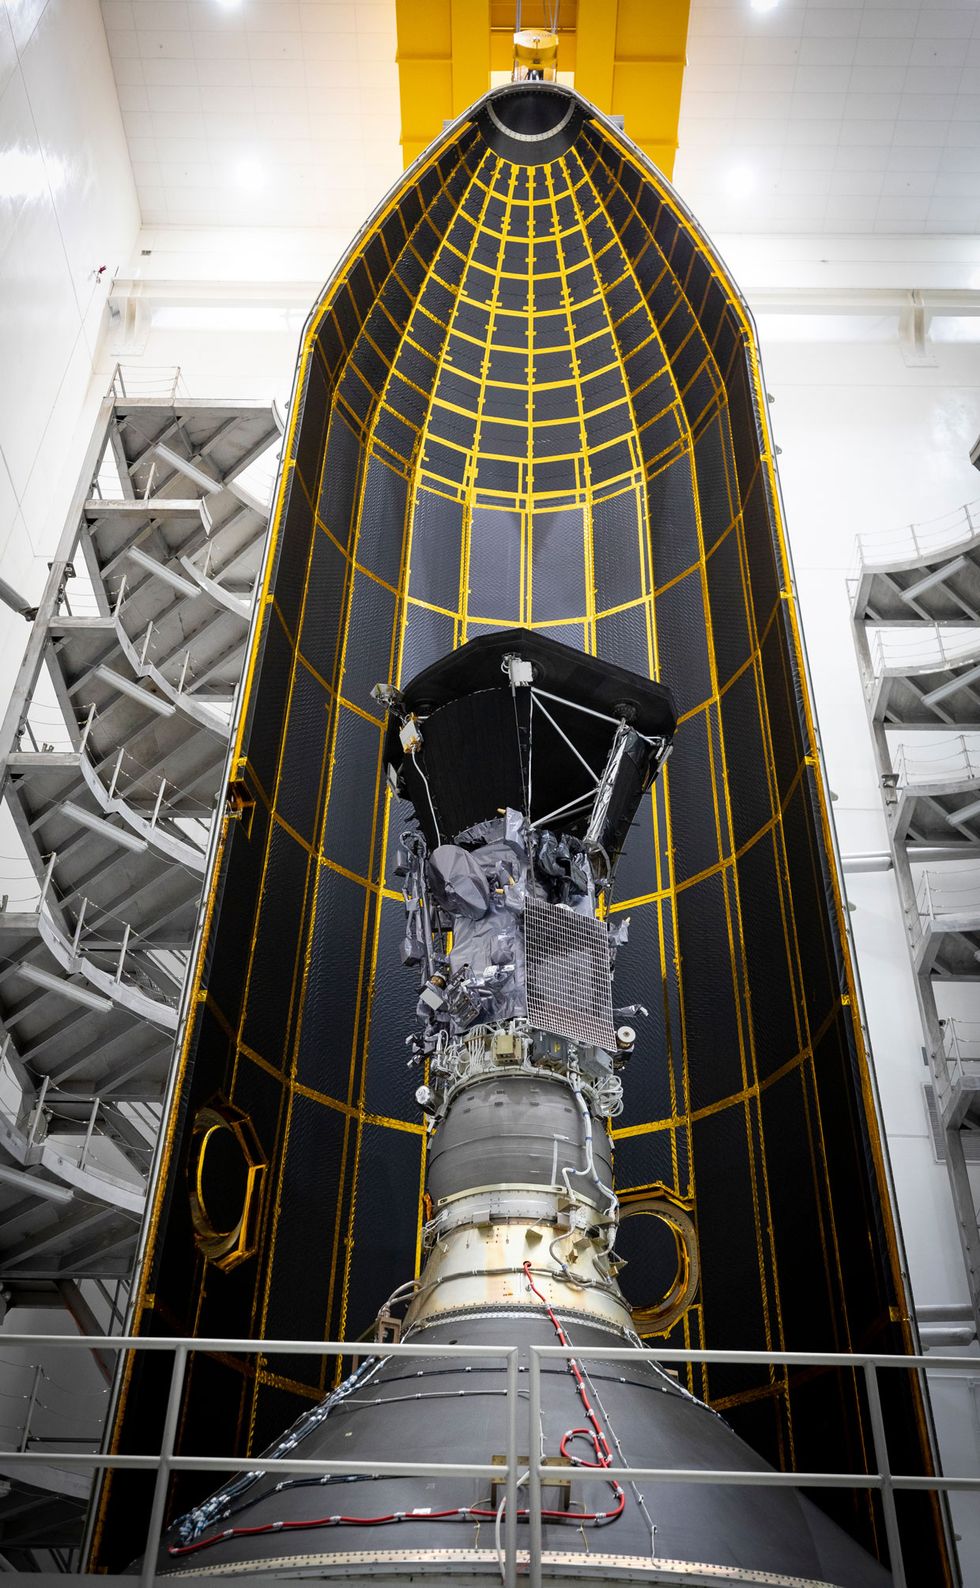 A photo of the probe inside the fairing that protects it.